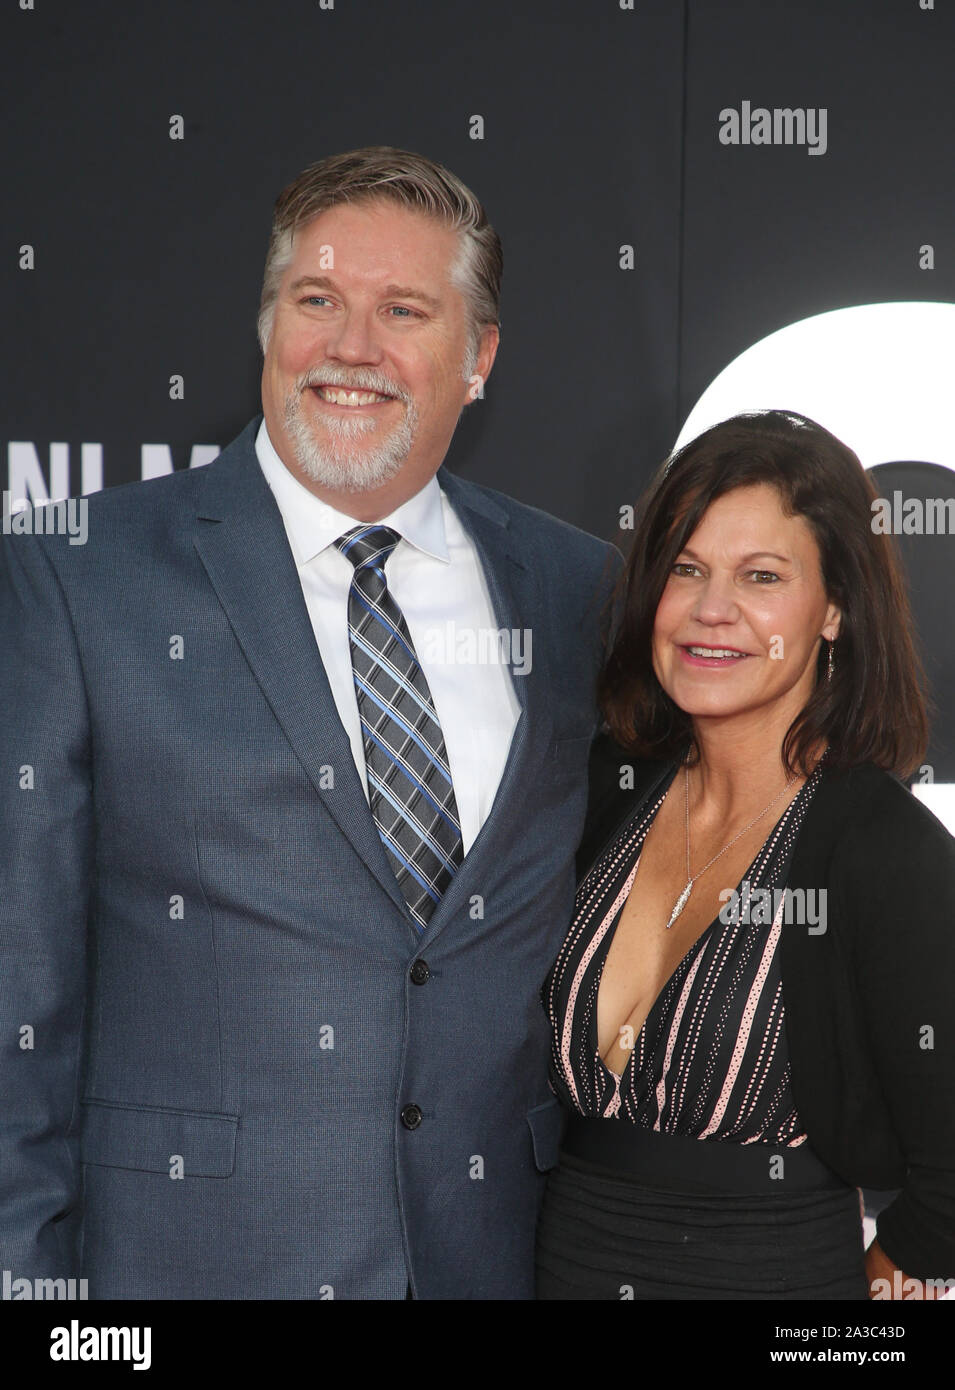 October 6, 2019, Hollywood, CA, USA: 6 October 2019 - Hollywood, California - Bill Westenhofer, Guest. Paramount Pictures' Premiere Of ''Gemini Man'' held at TCL Chinese Theatre. Photo Credit: FayeS/AdMedia (Credit Image: © F Sadou/AdMedia via ZUMA Wire) Stock Photo